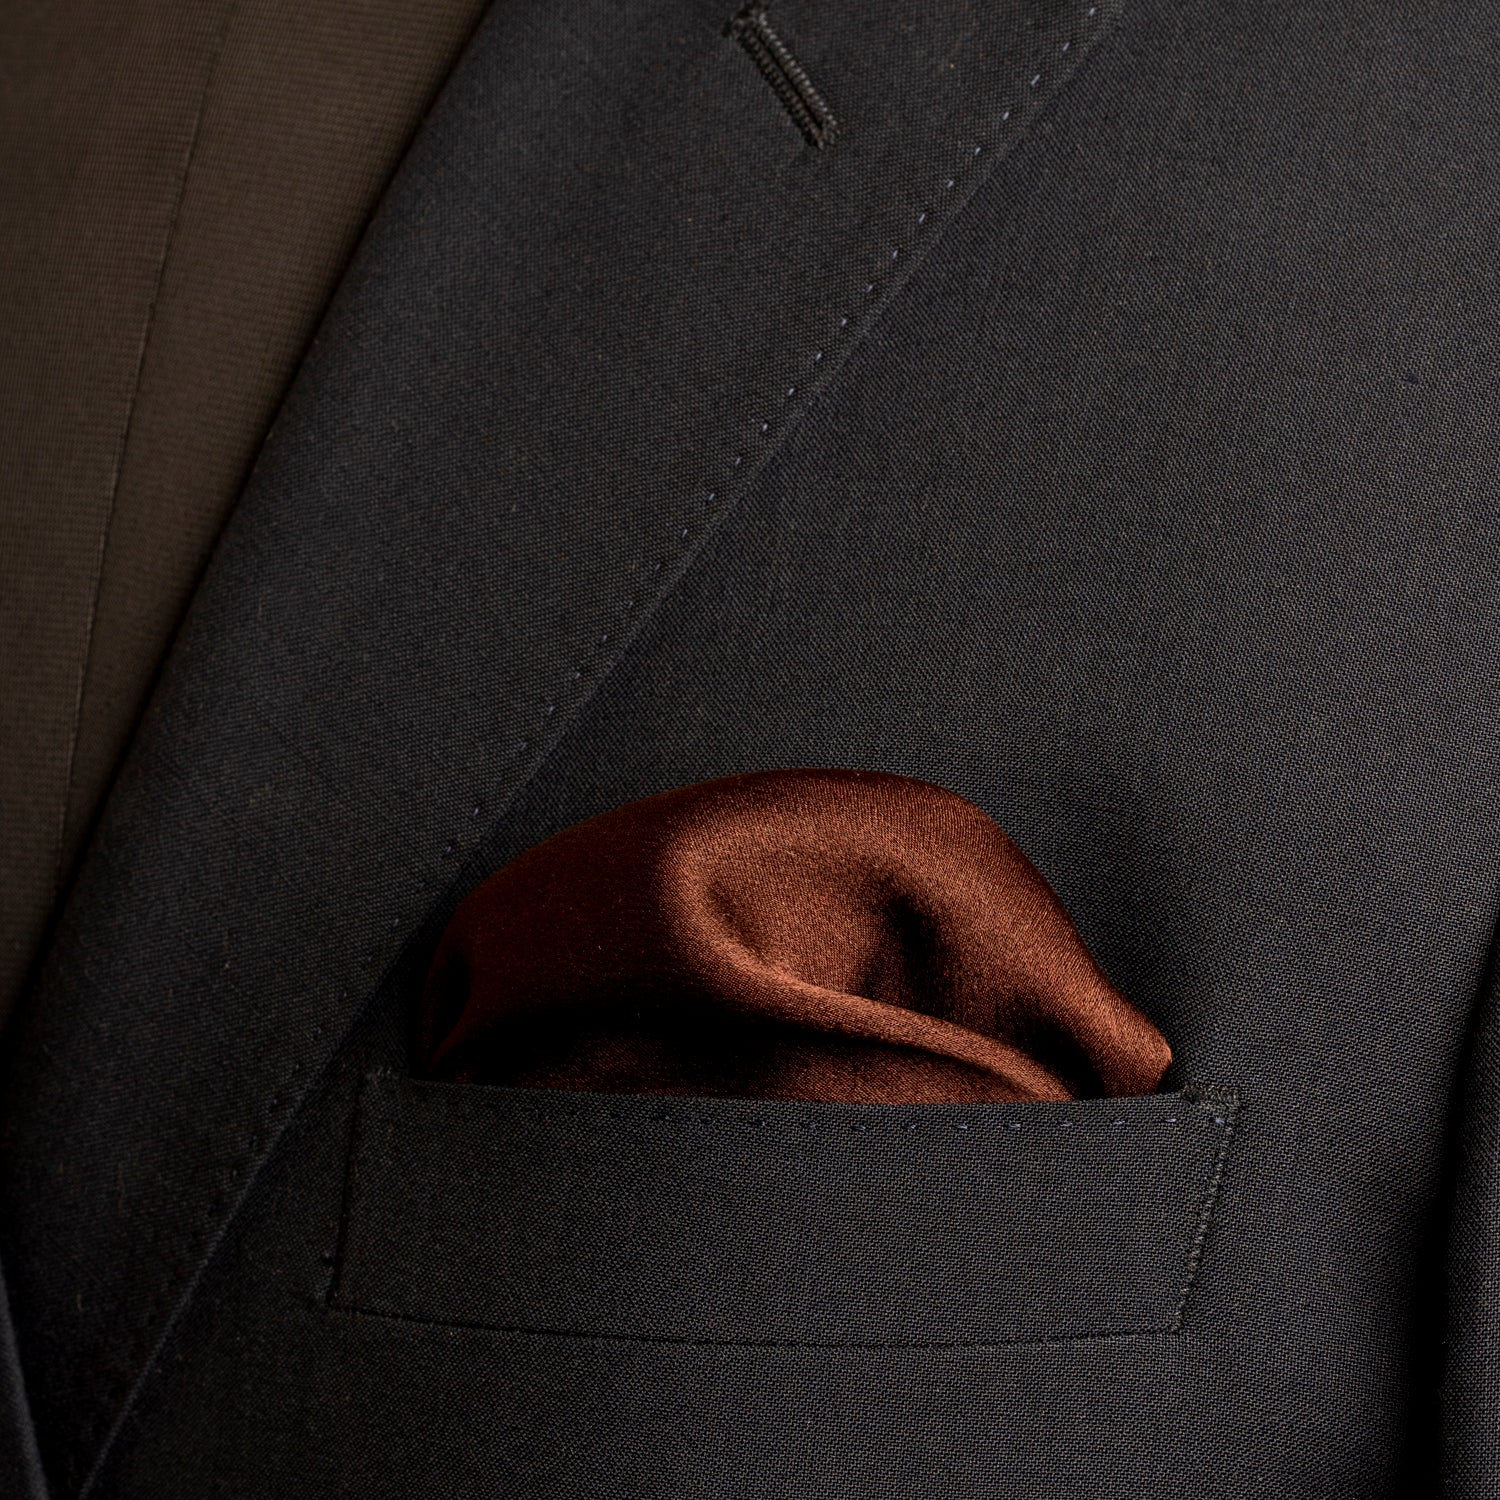 Chokore Brown Satin Silk pocket square from the Sollids Line